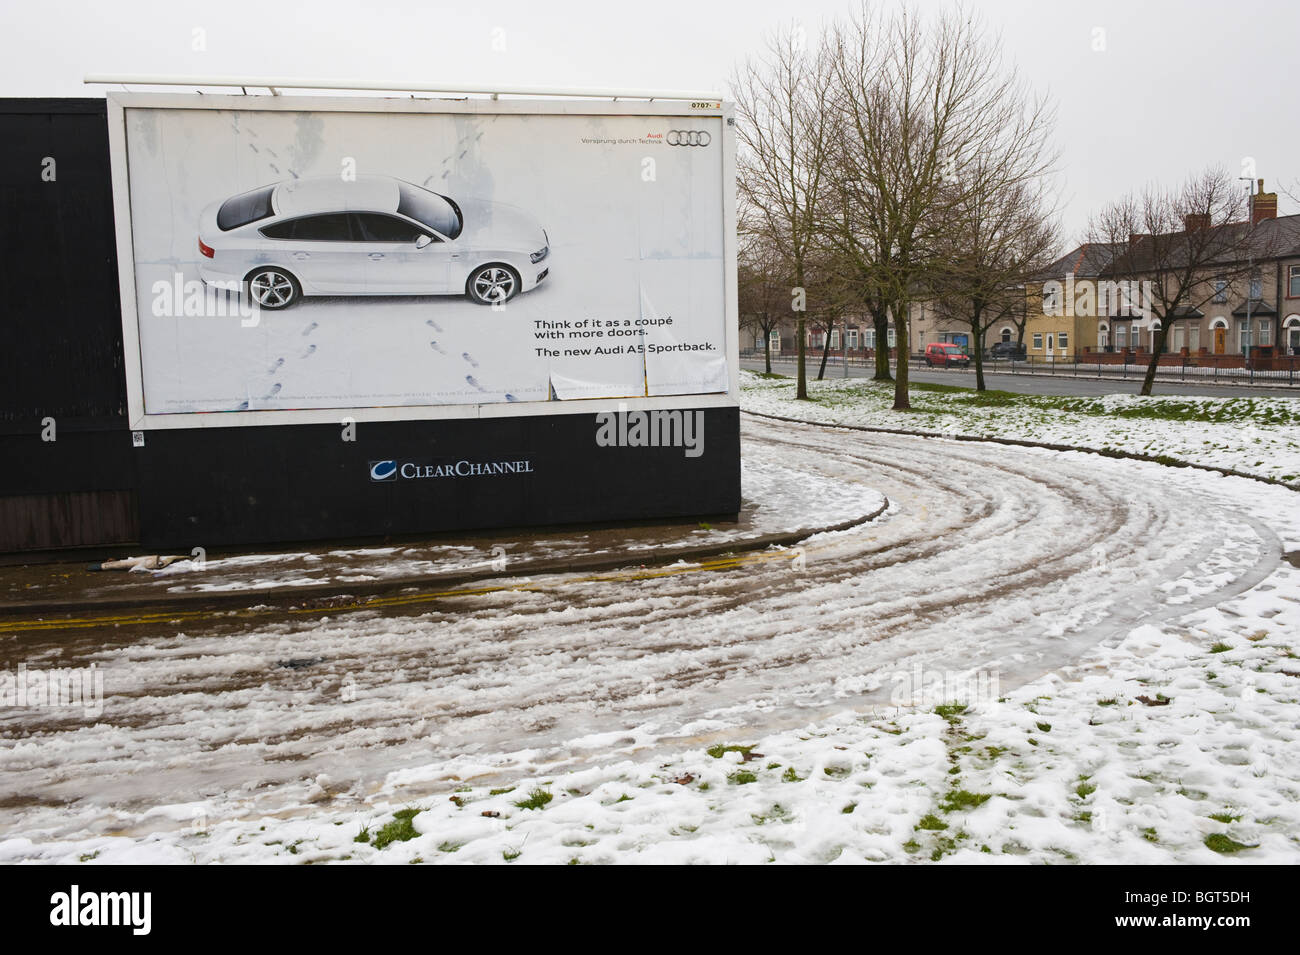 Audi A5 Sportback billboard on ClearChannel site in Newport South Wales UK Stock Photo